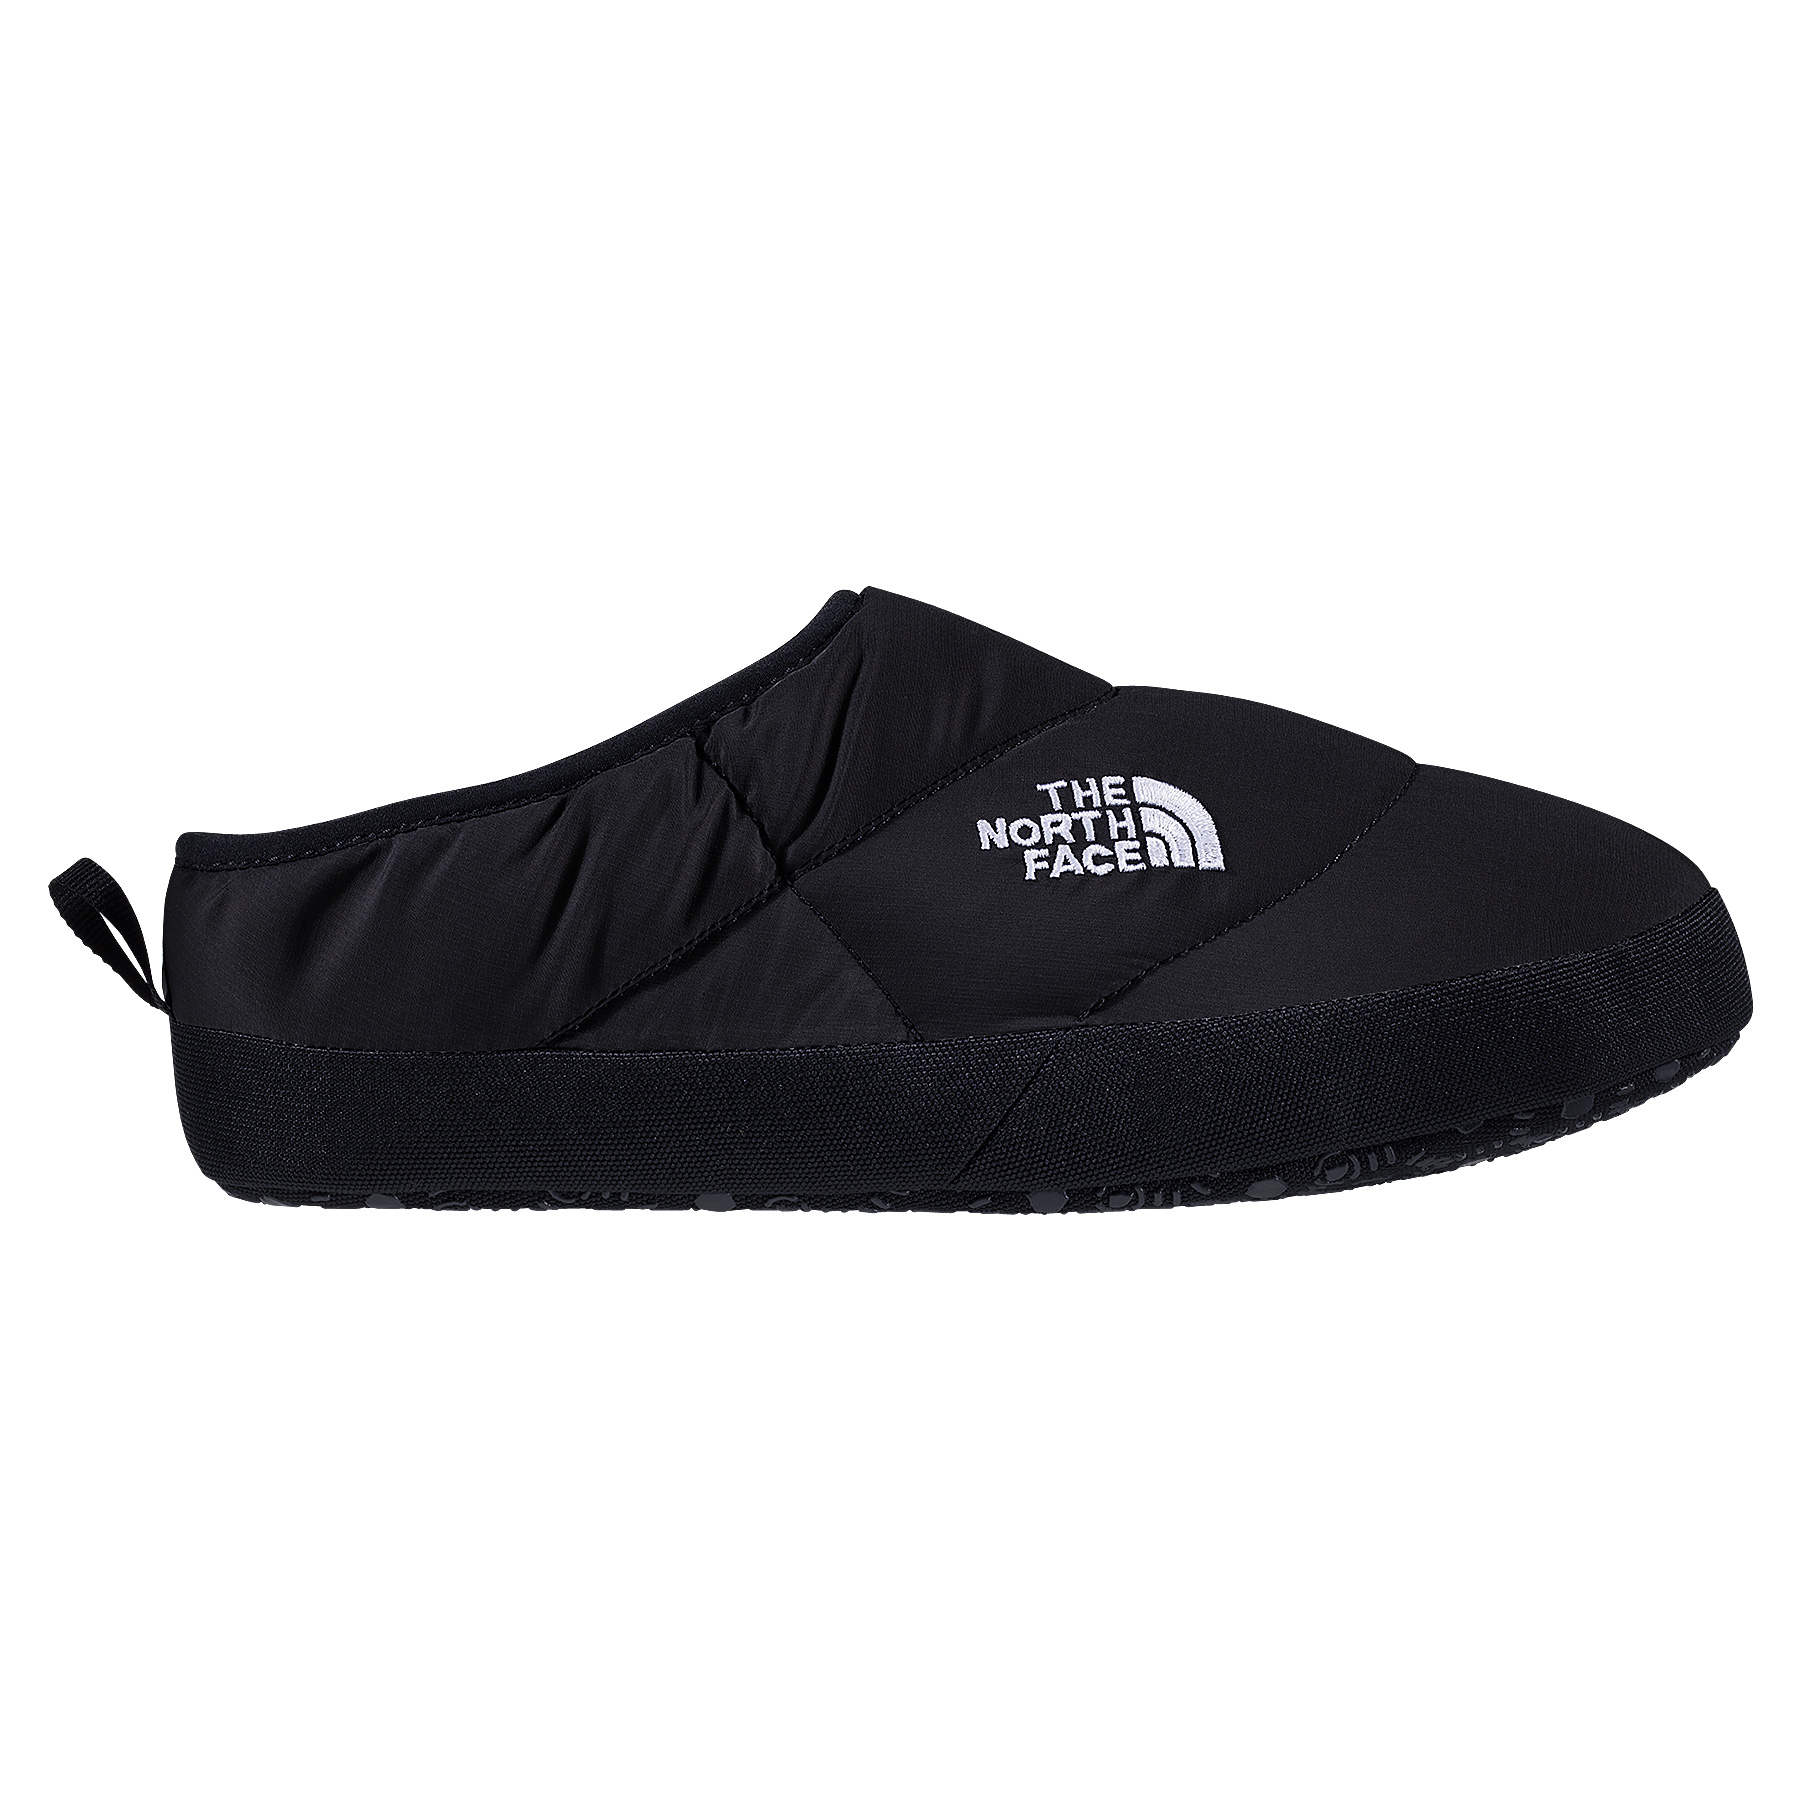 down slippers north face